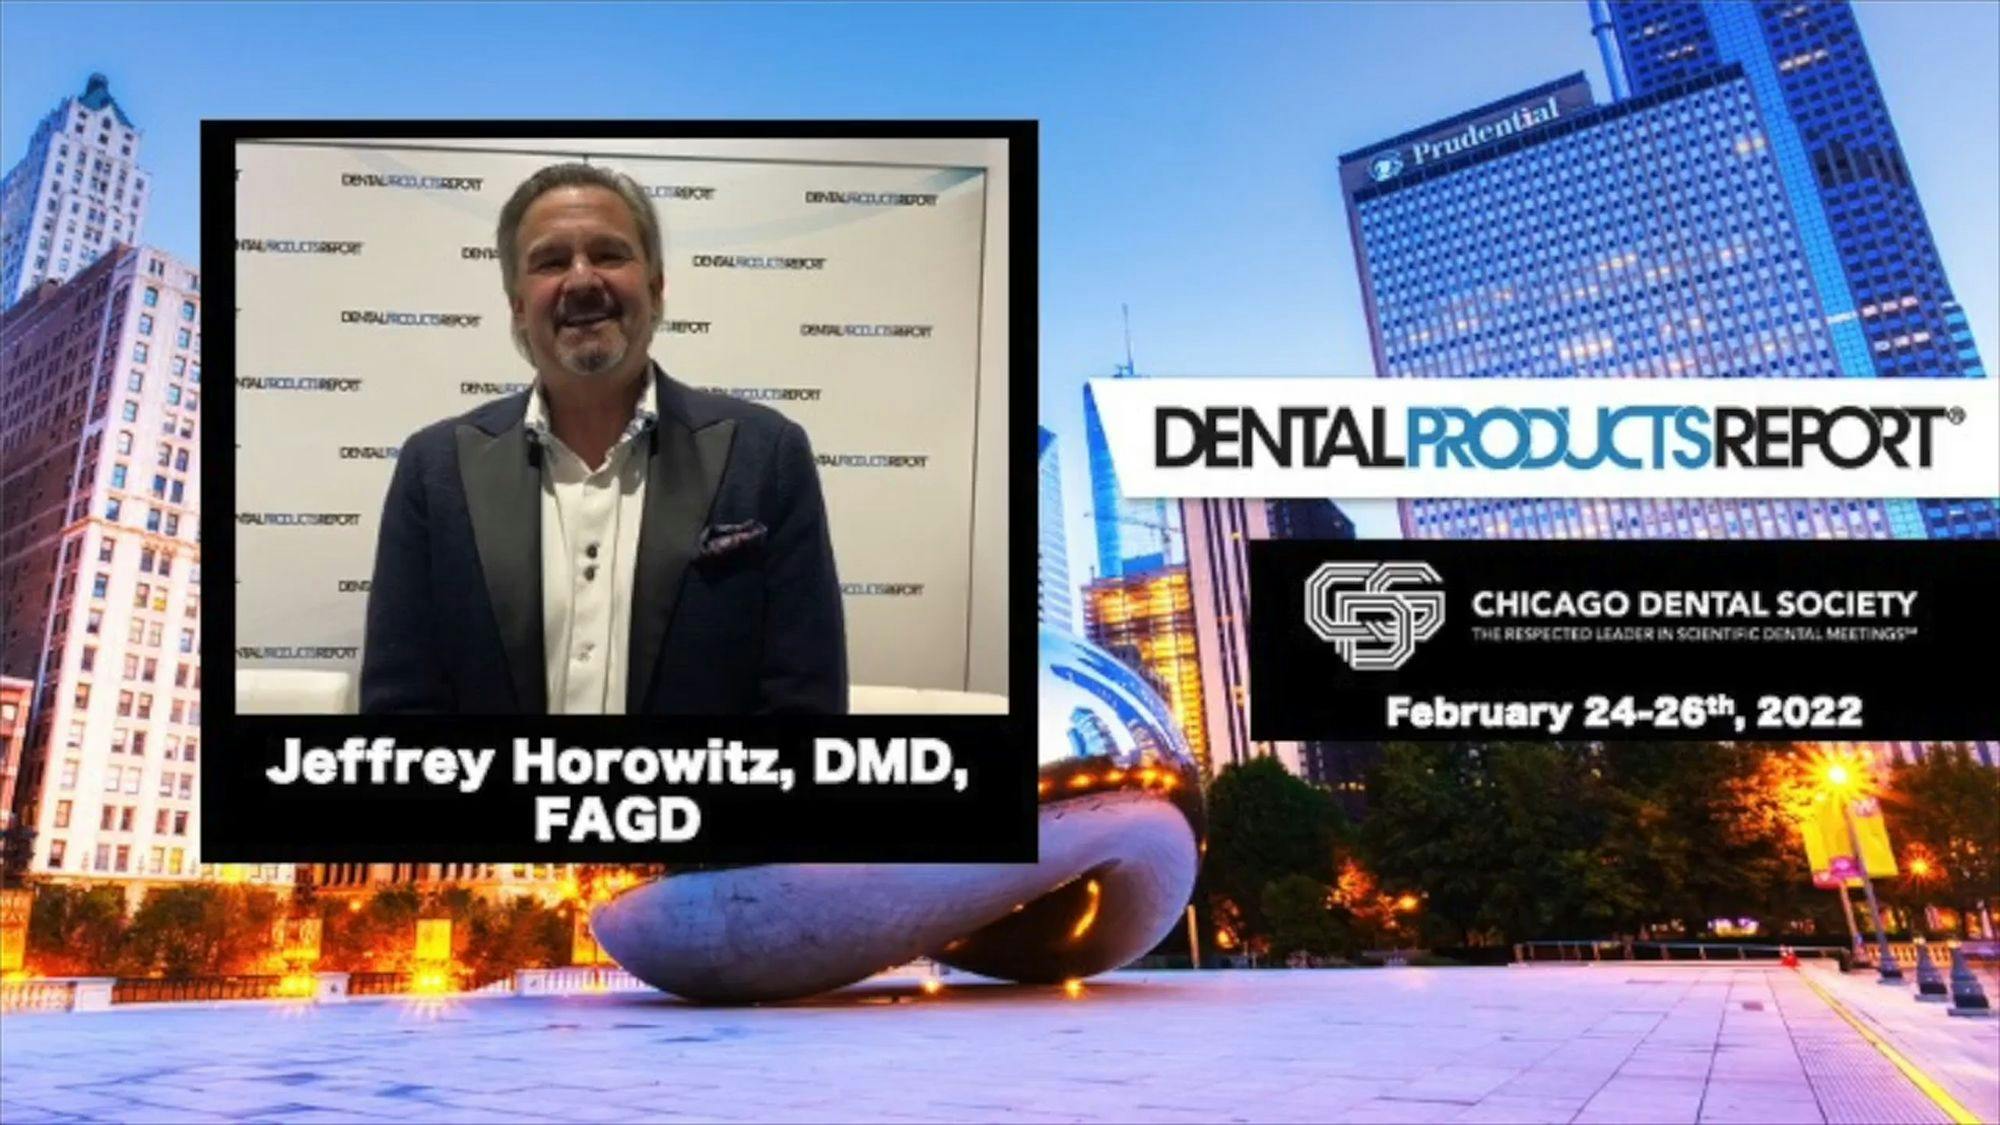 2022 Chicago Dental Society Midwinter Meeting, Interview with Jeff Horowitz, DMD, FAGD